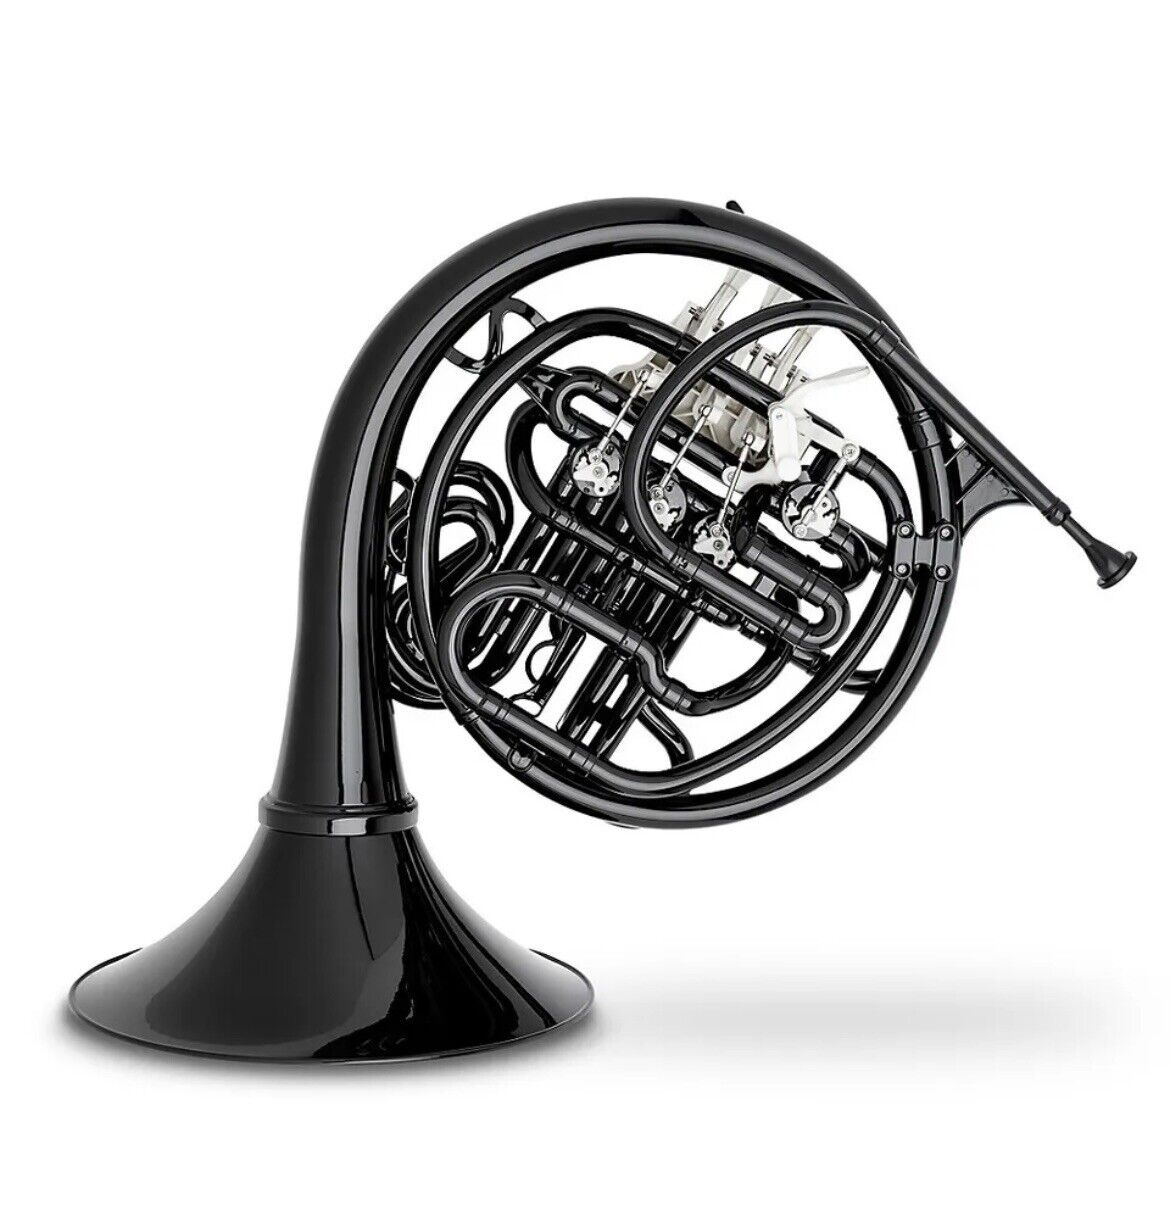 CoolWind CFH-200 Series Double French Horn Black USED 4